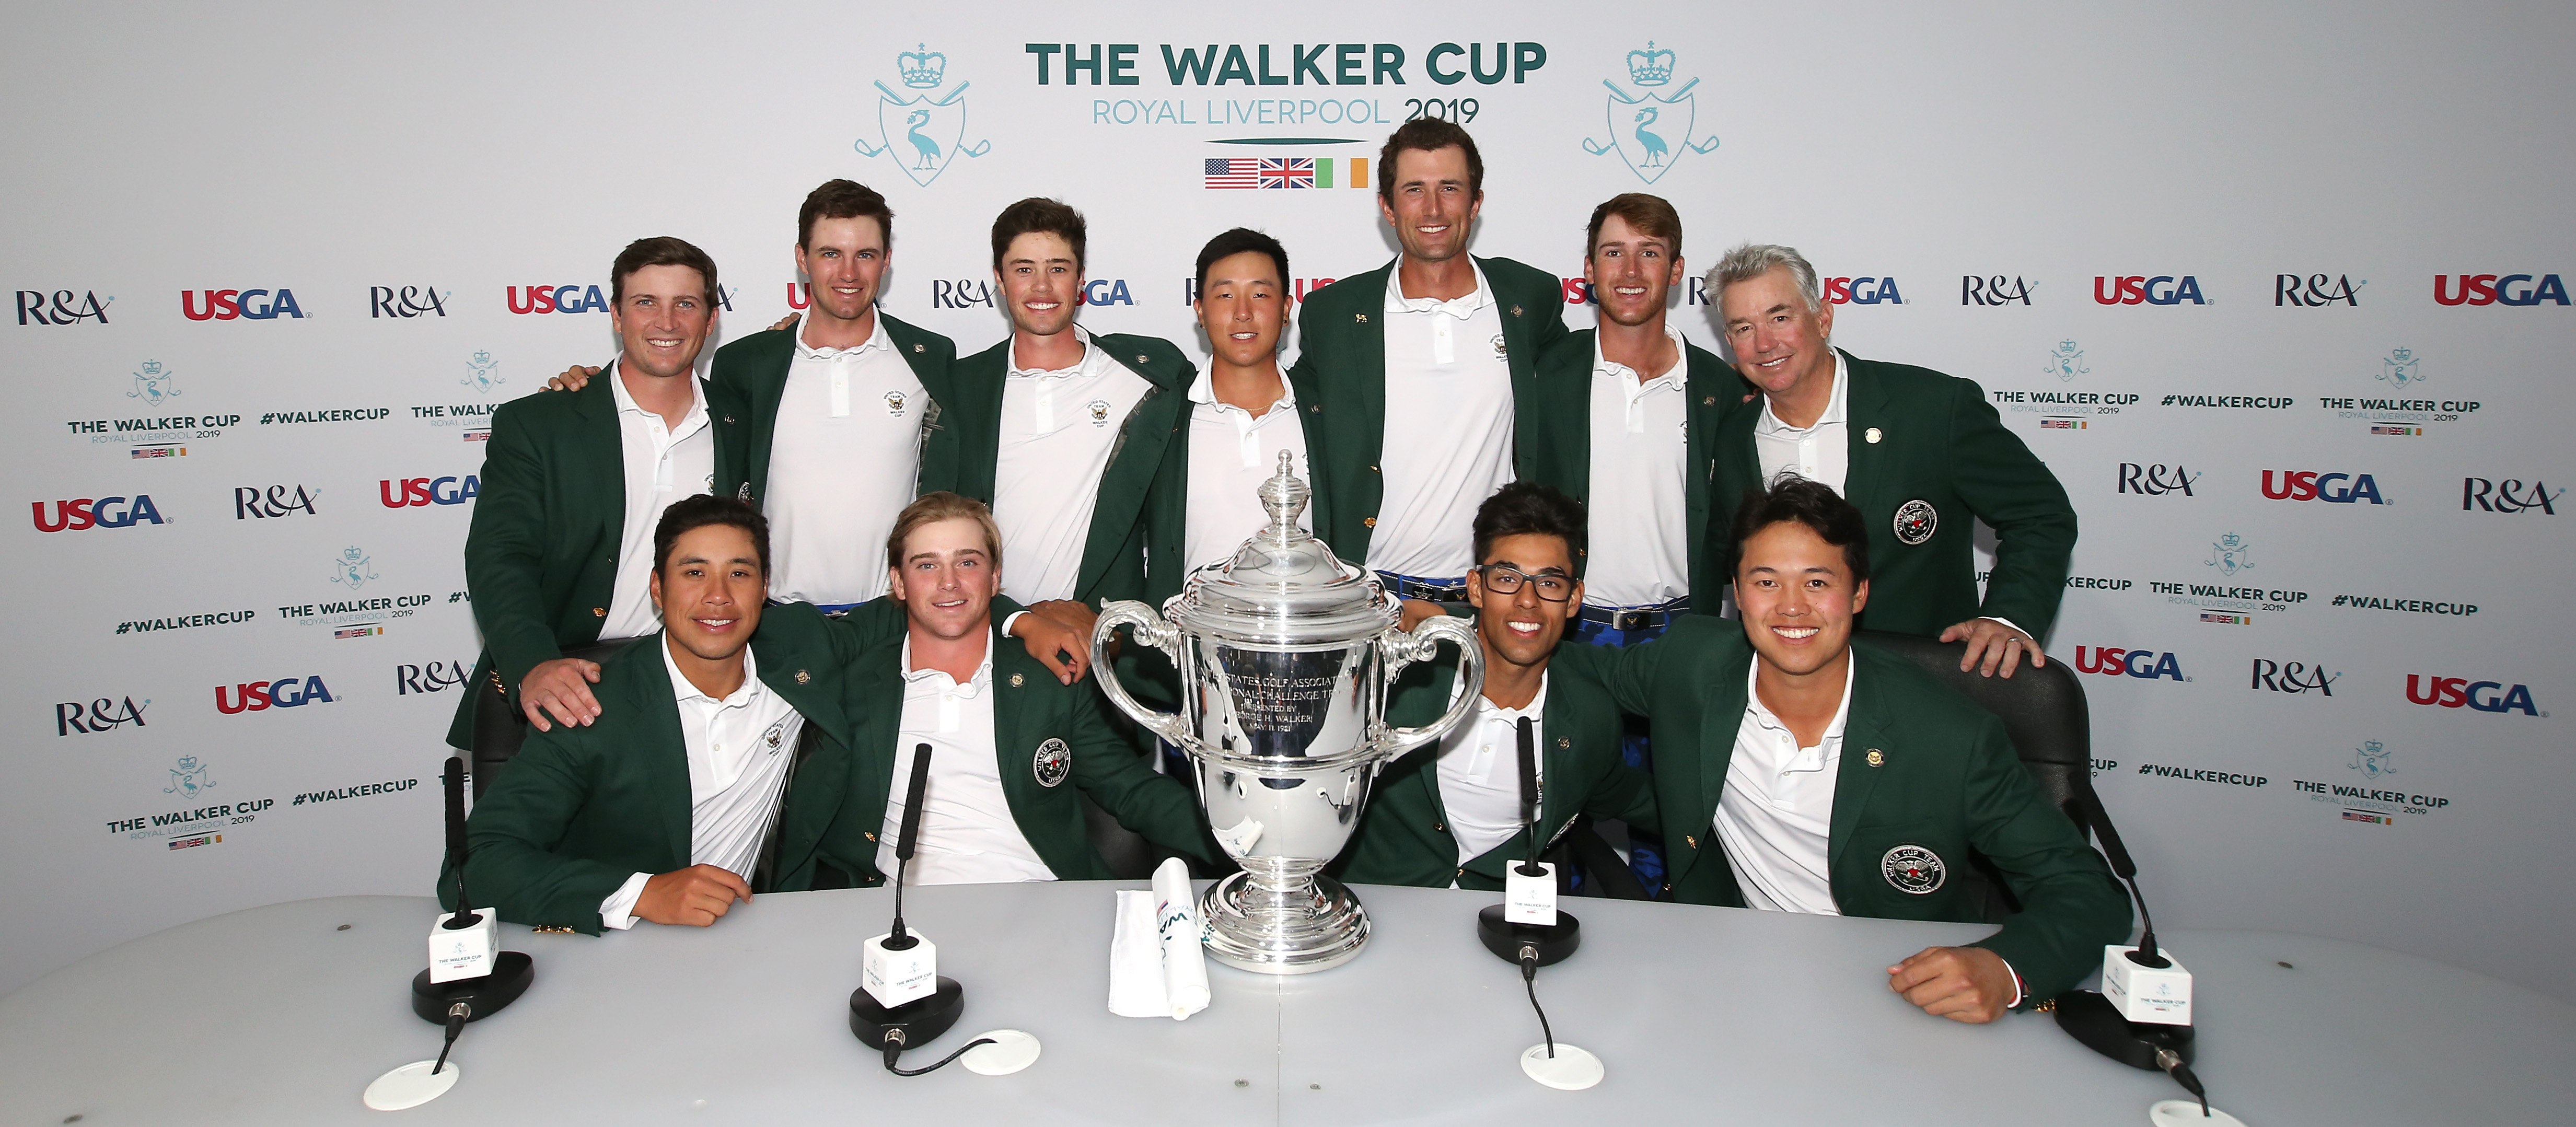 Team USA clinches Walker Cup victory at Royal Liverpool